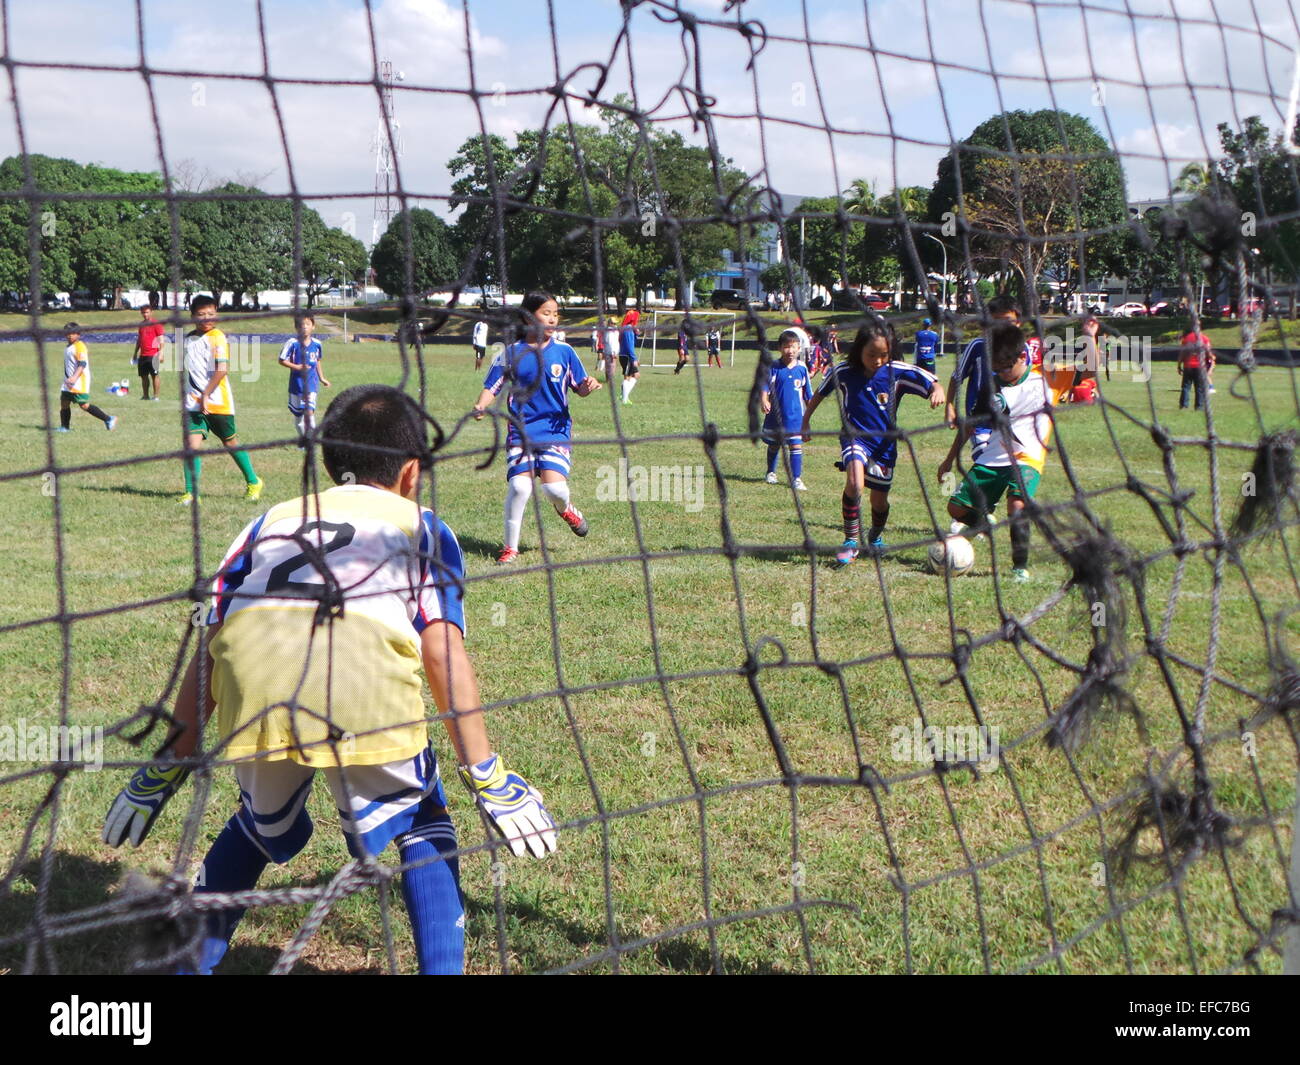 Taguig City, Philippines. 31th January, 2015. Around 700 kids, teens and adults from 54 various football teams and advocacy group (composing of football clubs from orphanages and schools) joins the annual 4th Commandant’s Football Cup held at Marine Barracks in Taguig City. The football event is prelude to the big event dubbed as “Football for Peace” on April in which kids from conflict areas in Mindanao such as Basilan, Sulu and Tawi-Tawi are joined together to promote peace and not war. “Football for Peace” is an advocacy program of the Philippine Marines to remove the stigma of war among ki Stock Photo